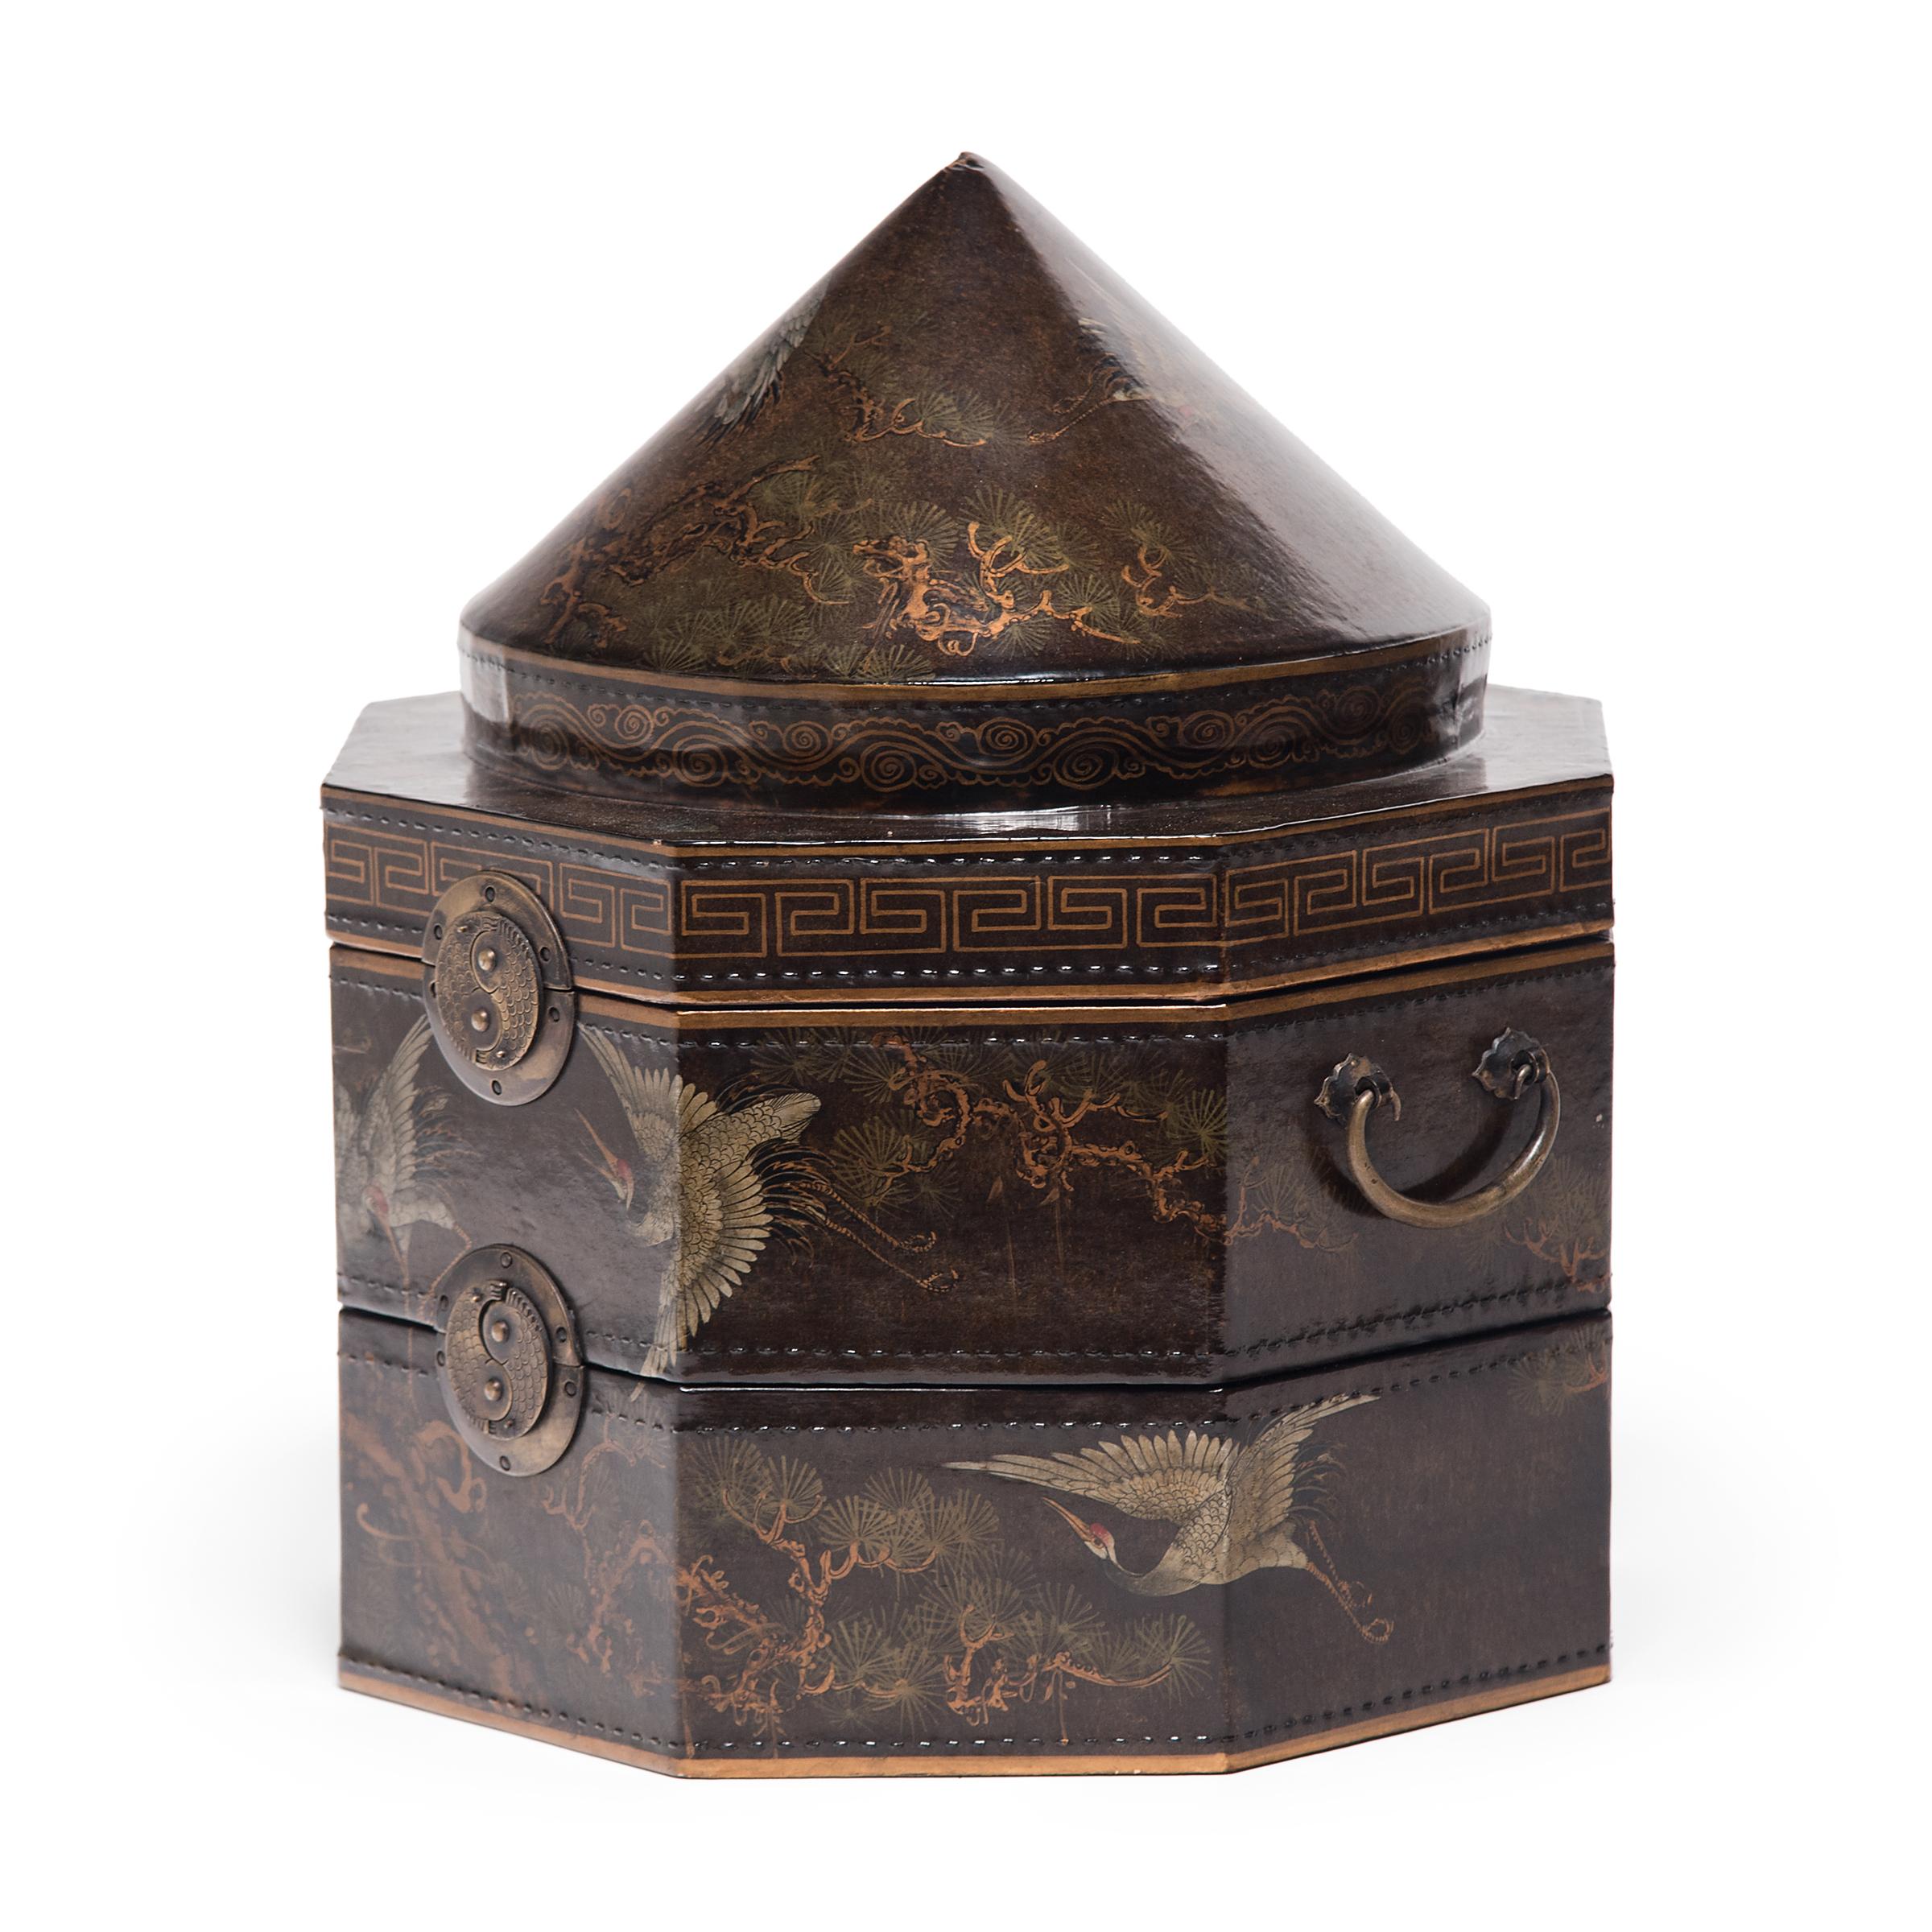 No self-respecting man in Qing-dynasty China would leave the house without some kind of hat. In fact, headgear was so central to social status that even the containers used to store one's hat were beautifully constructed. This luxurious gilt hat box